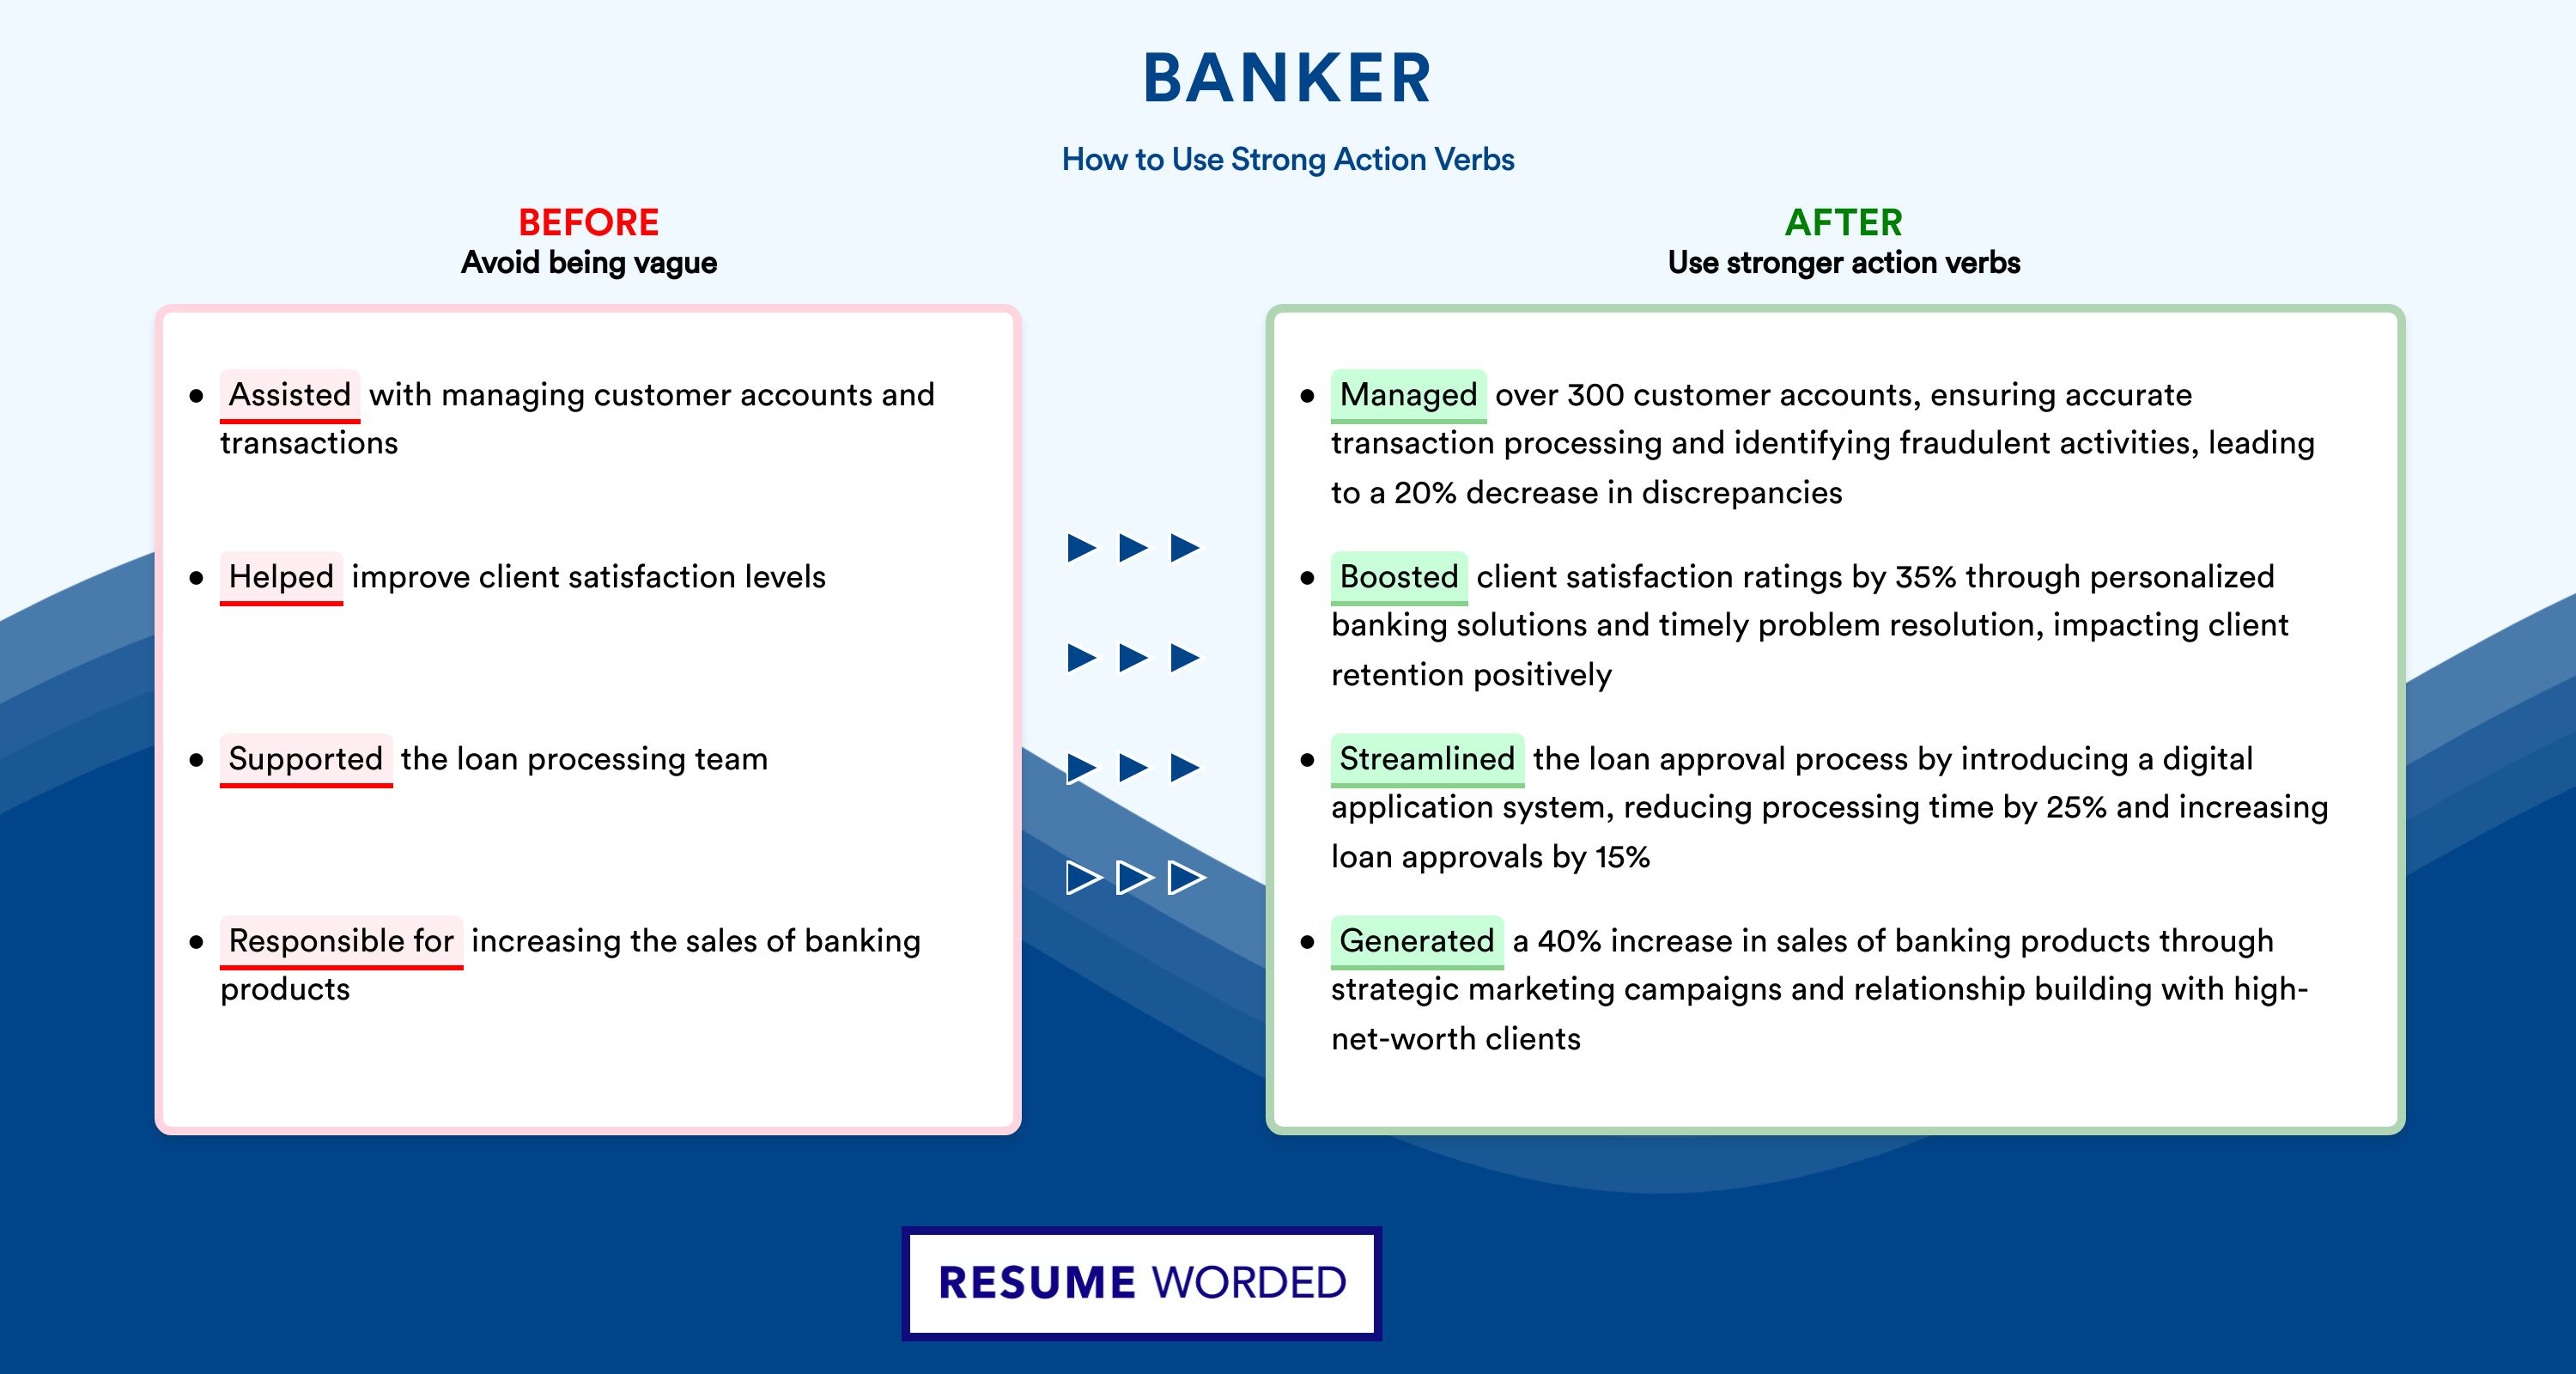 Action Verbs for Banker